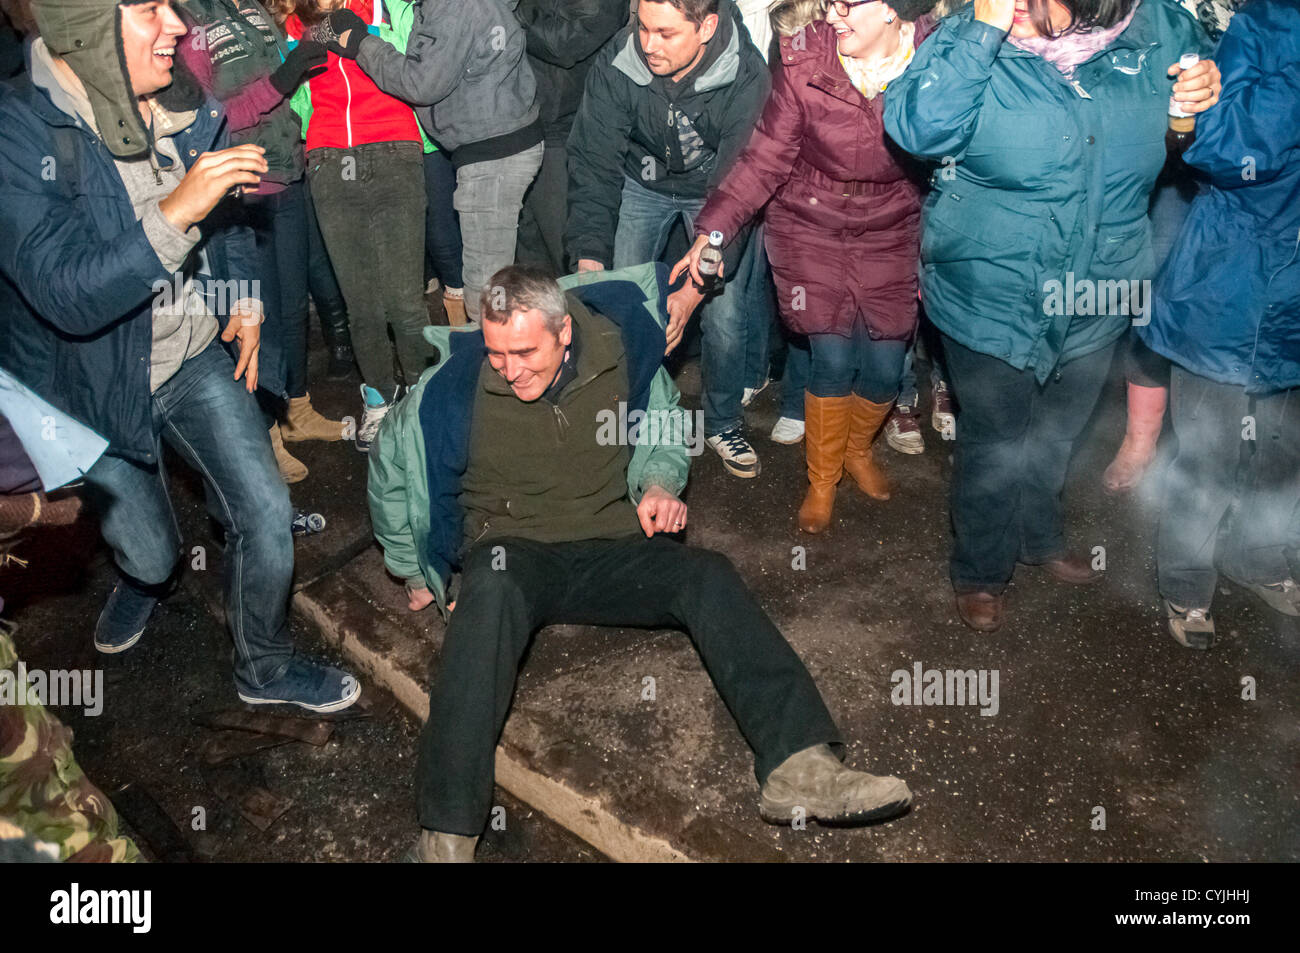 A man is knocked to the ground by the barrel rollers during the 2012 Tar barrel Burning in Ottery St Mary, Devon, UK. 5th November 2012. Stock Photo